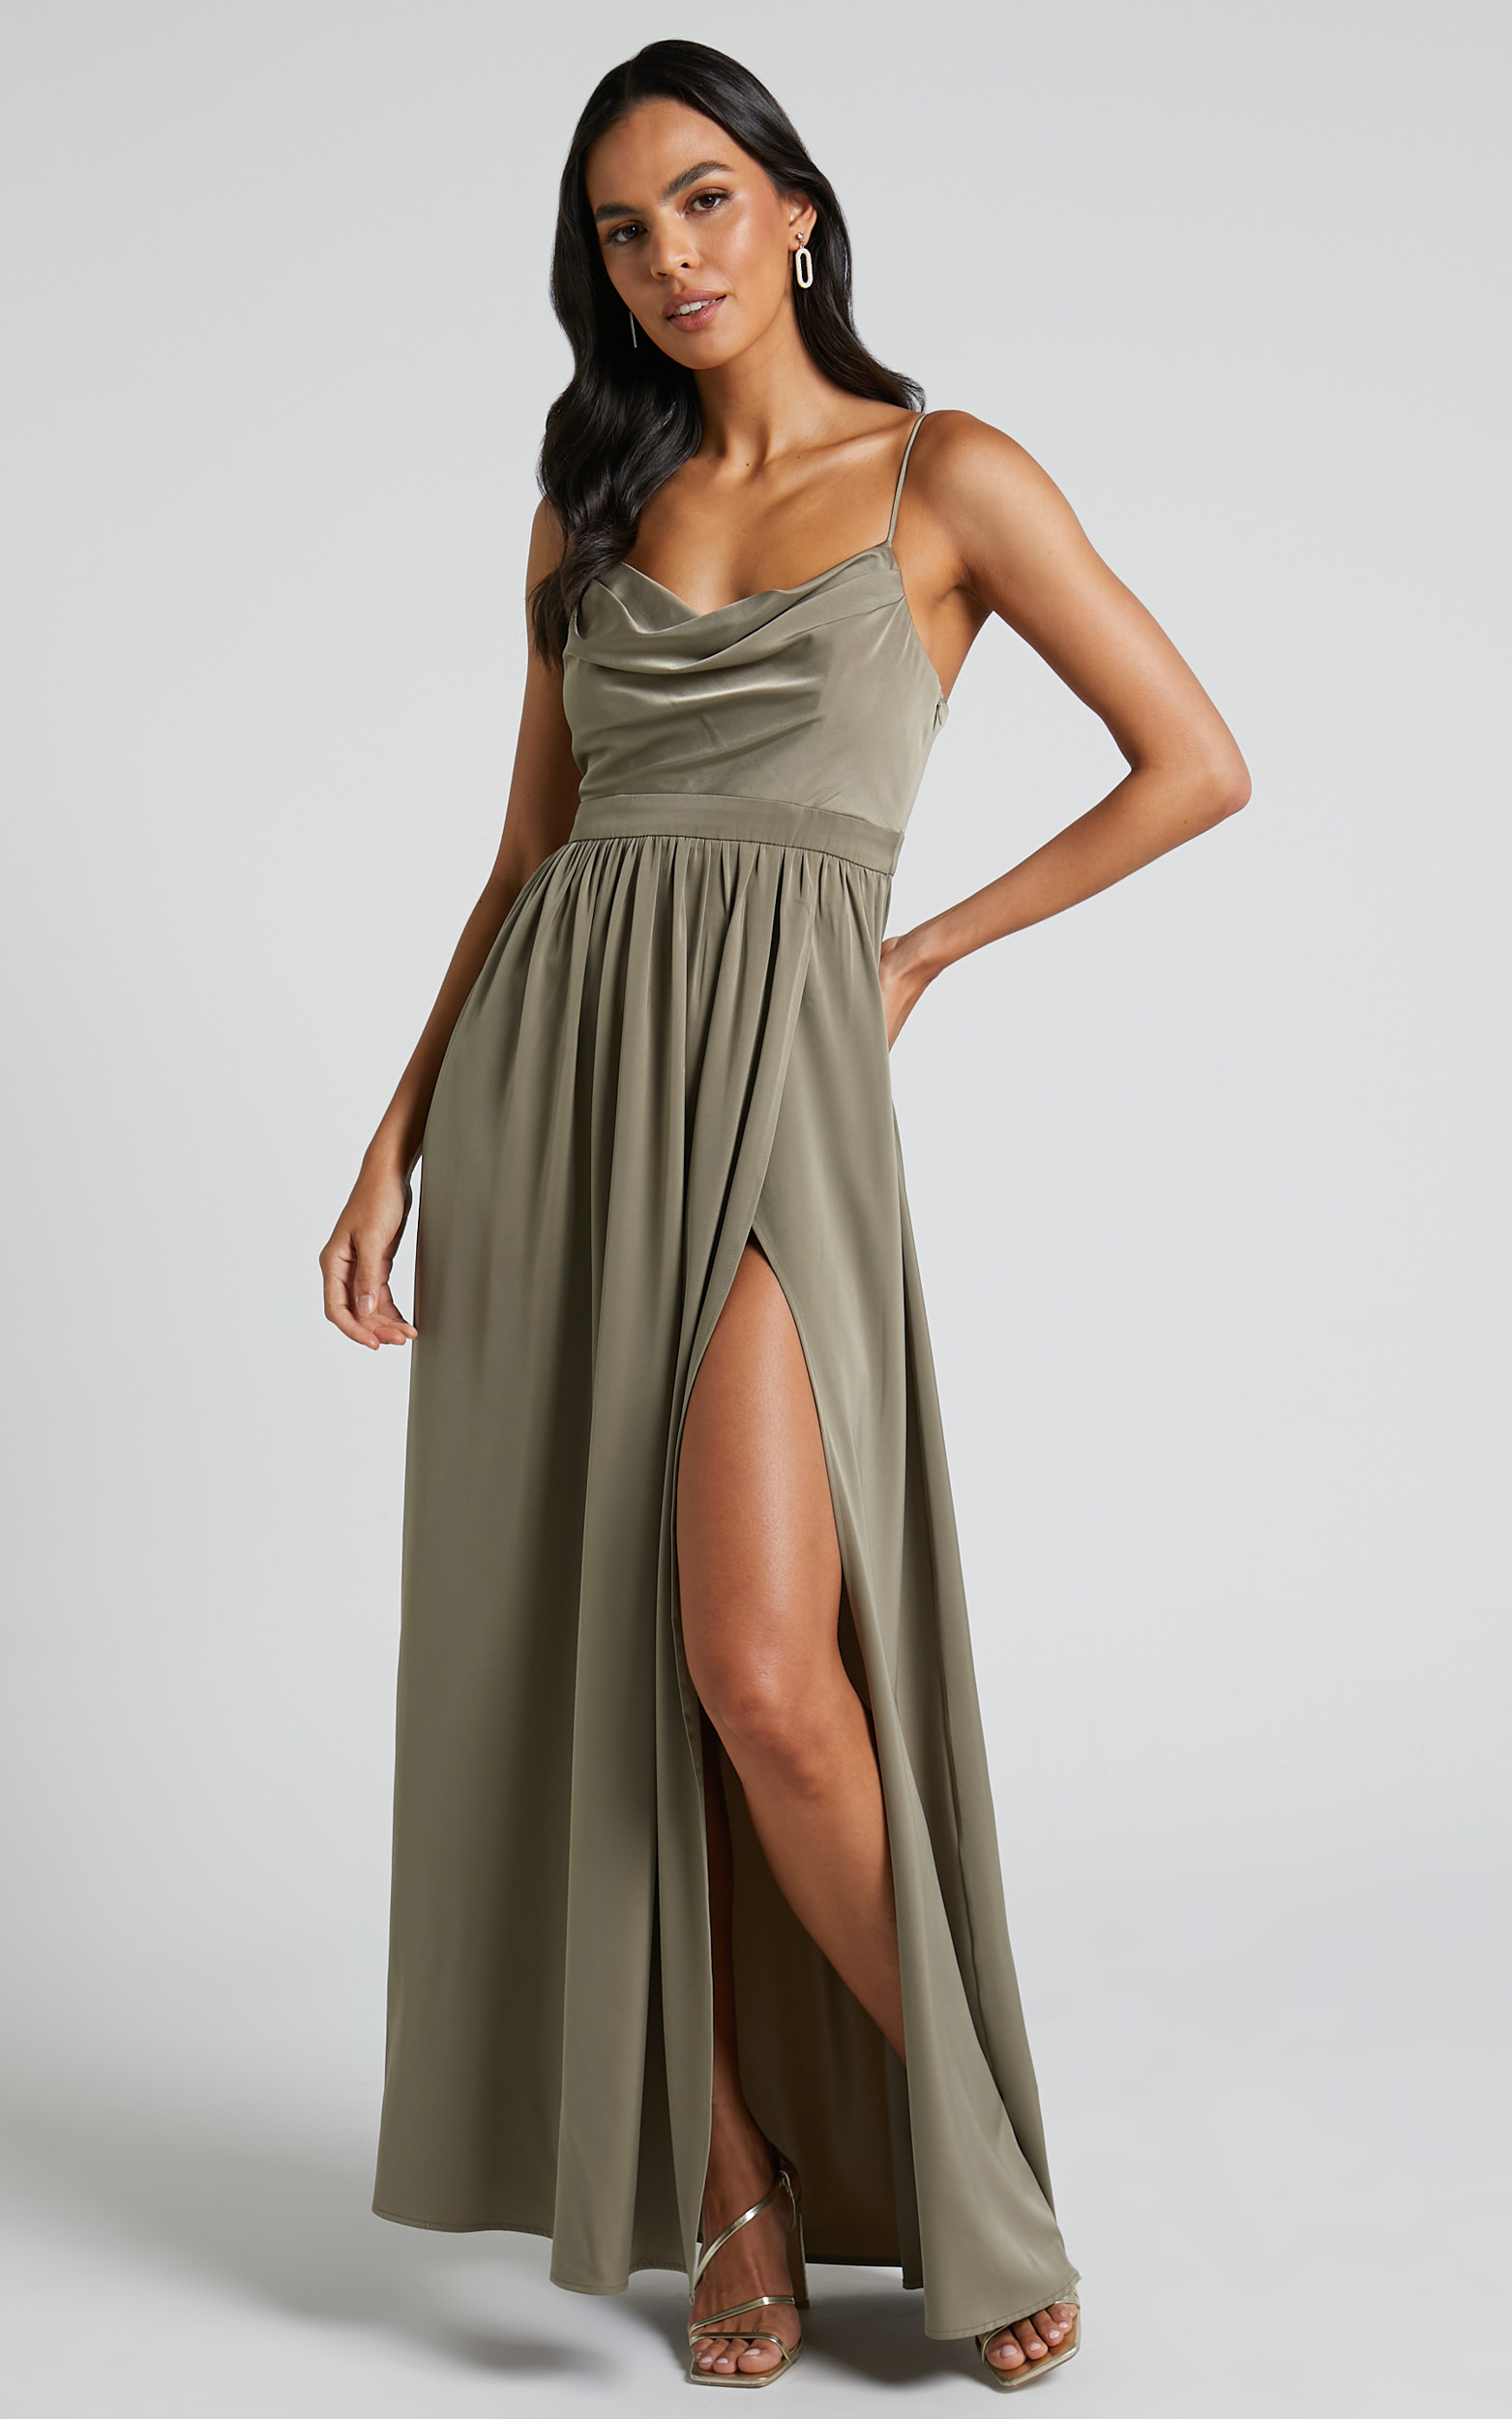 Gemalyn Maxi Dress - Cowl Neck Thigh Split Dress in Olive - 04, GRN1, hi-res image number null